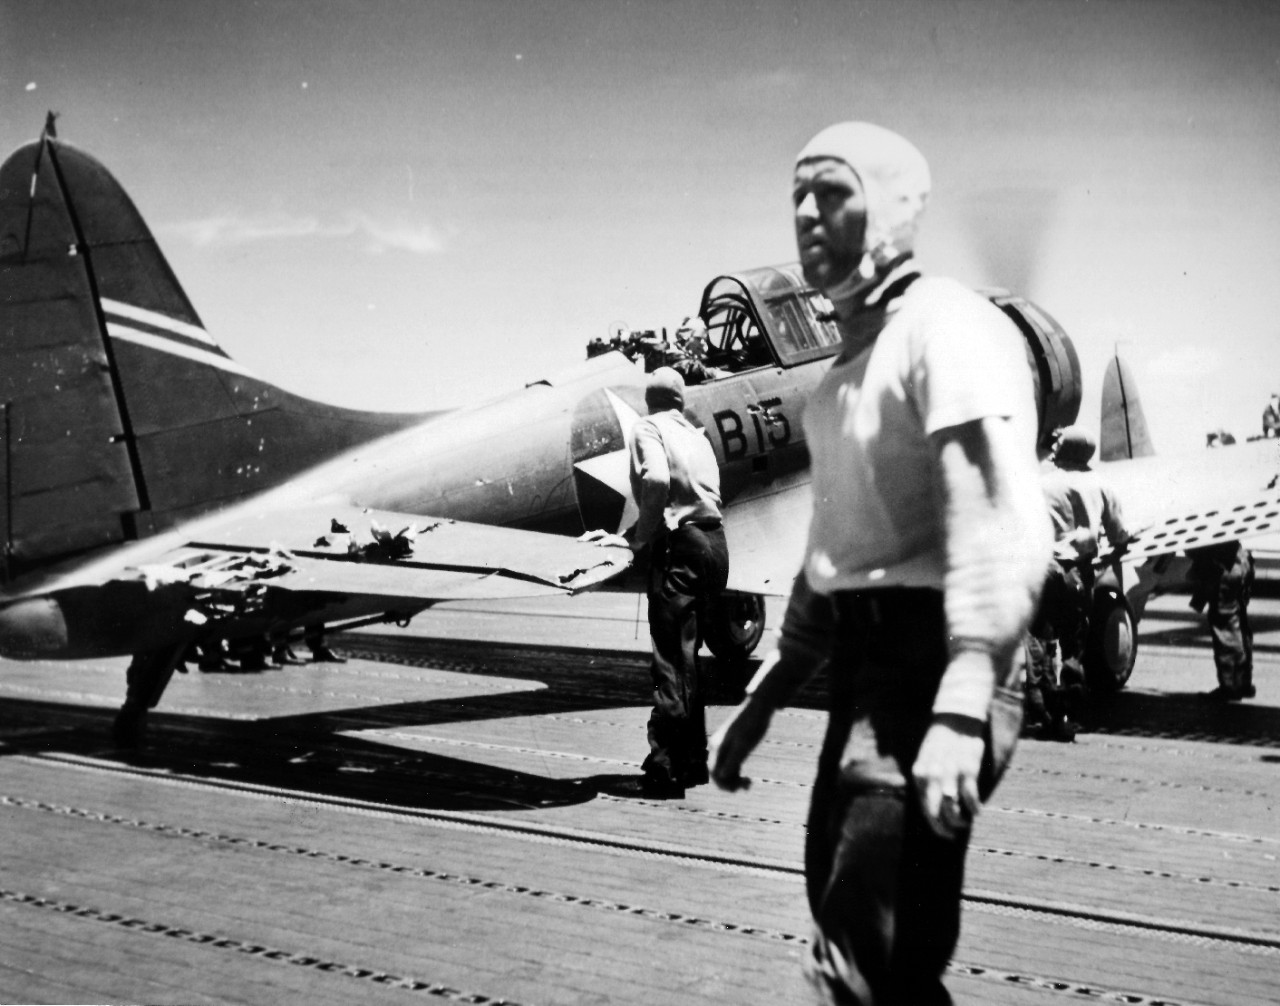 Photo #: NH 95557 Battle of Midway, June 1942